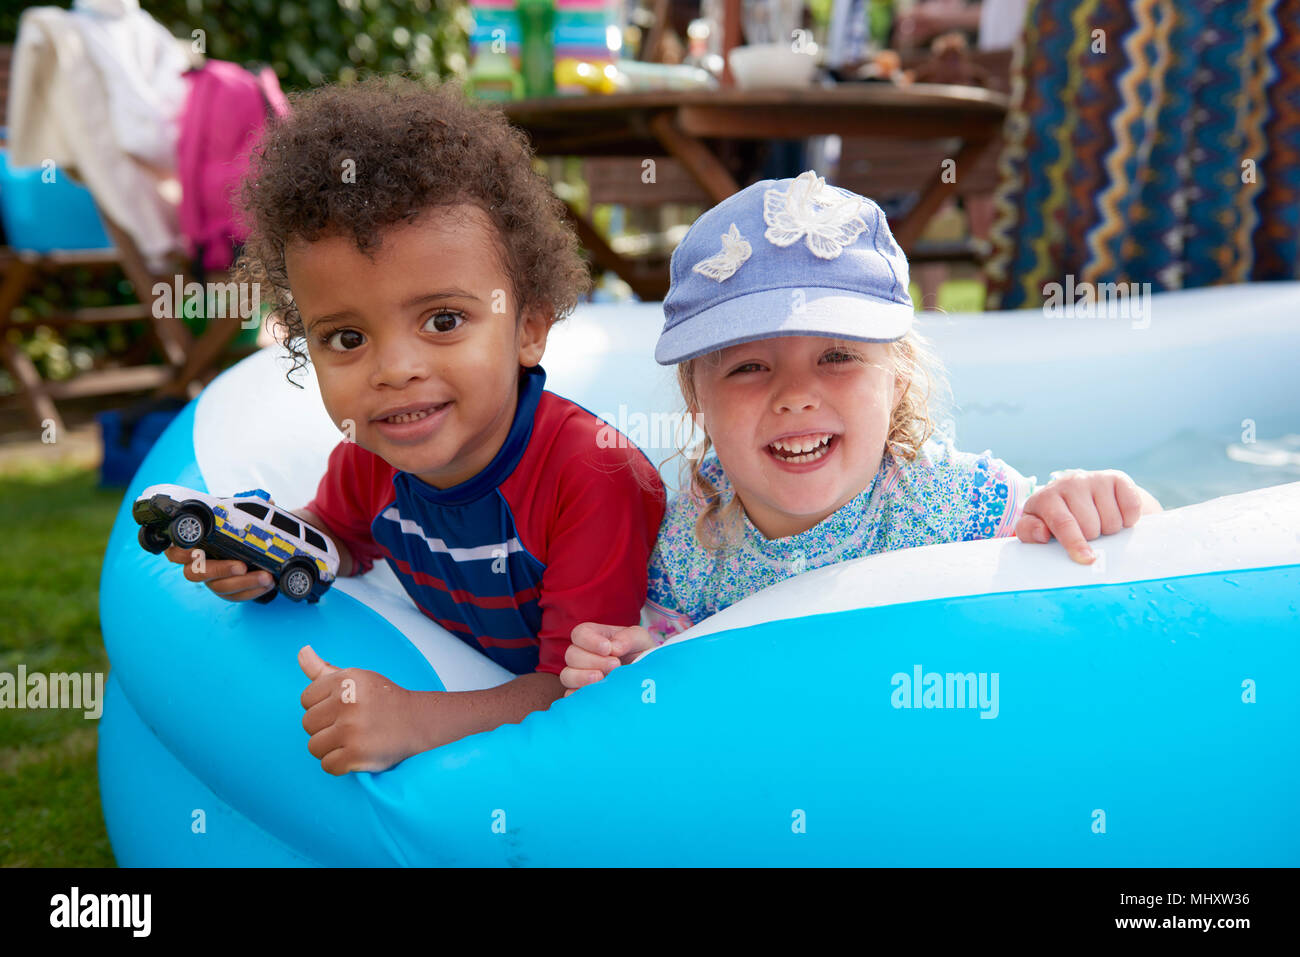 Two toddlers playing in paddling pool, portrait Stock Photo